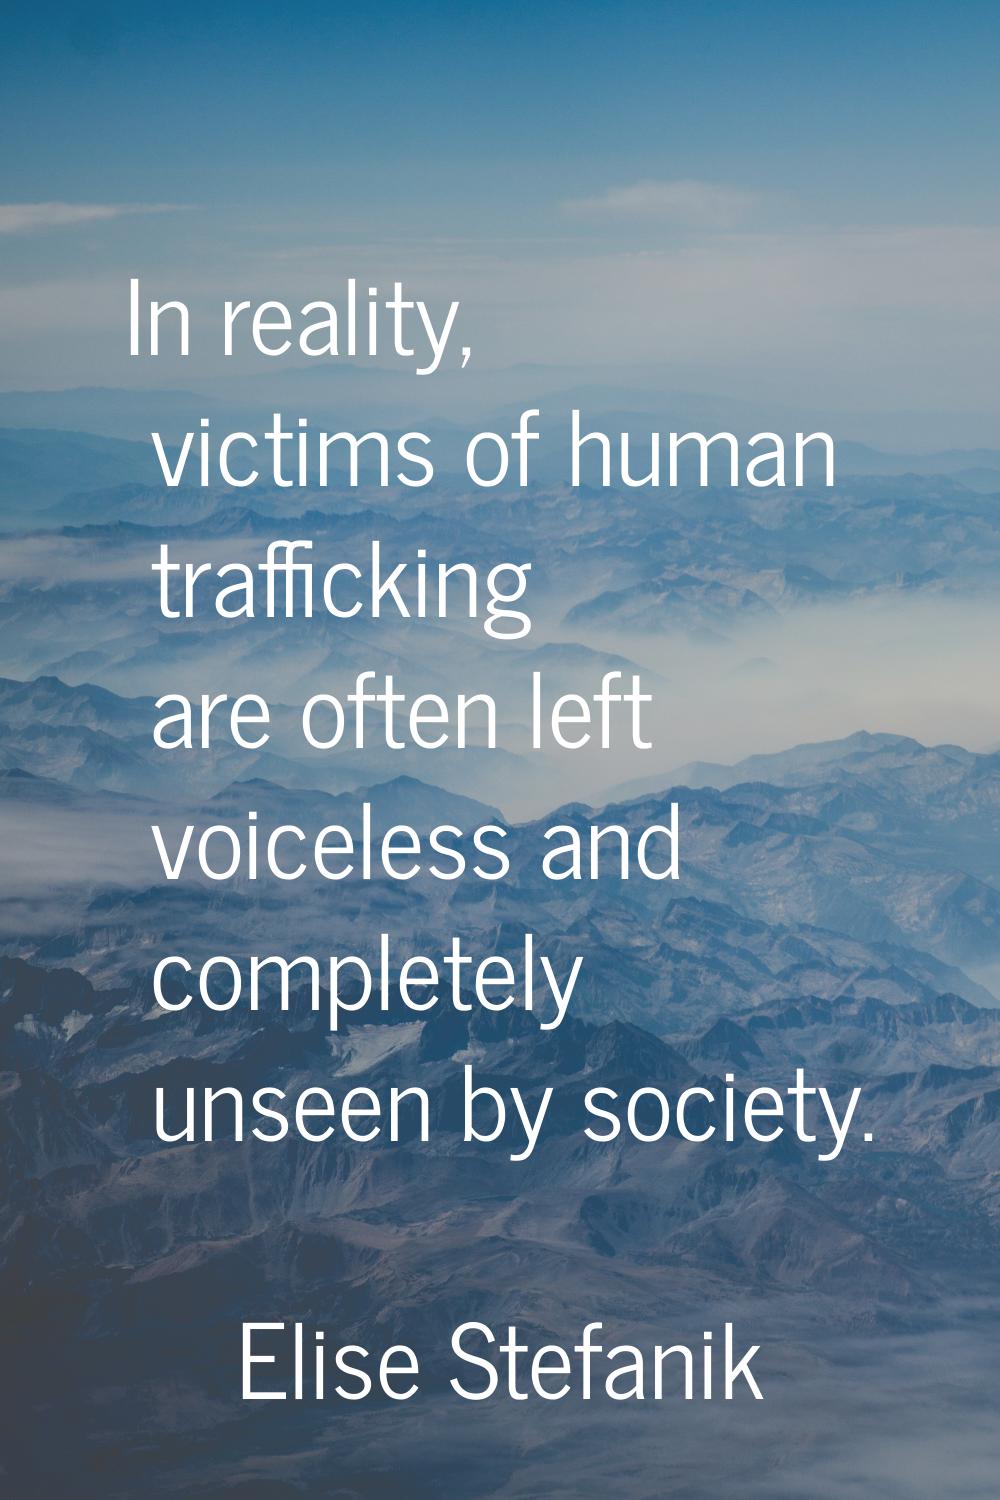 In reality, victims of human trafficking are often left voiceless and completely unseen by society.